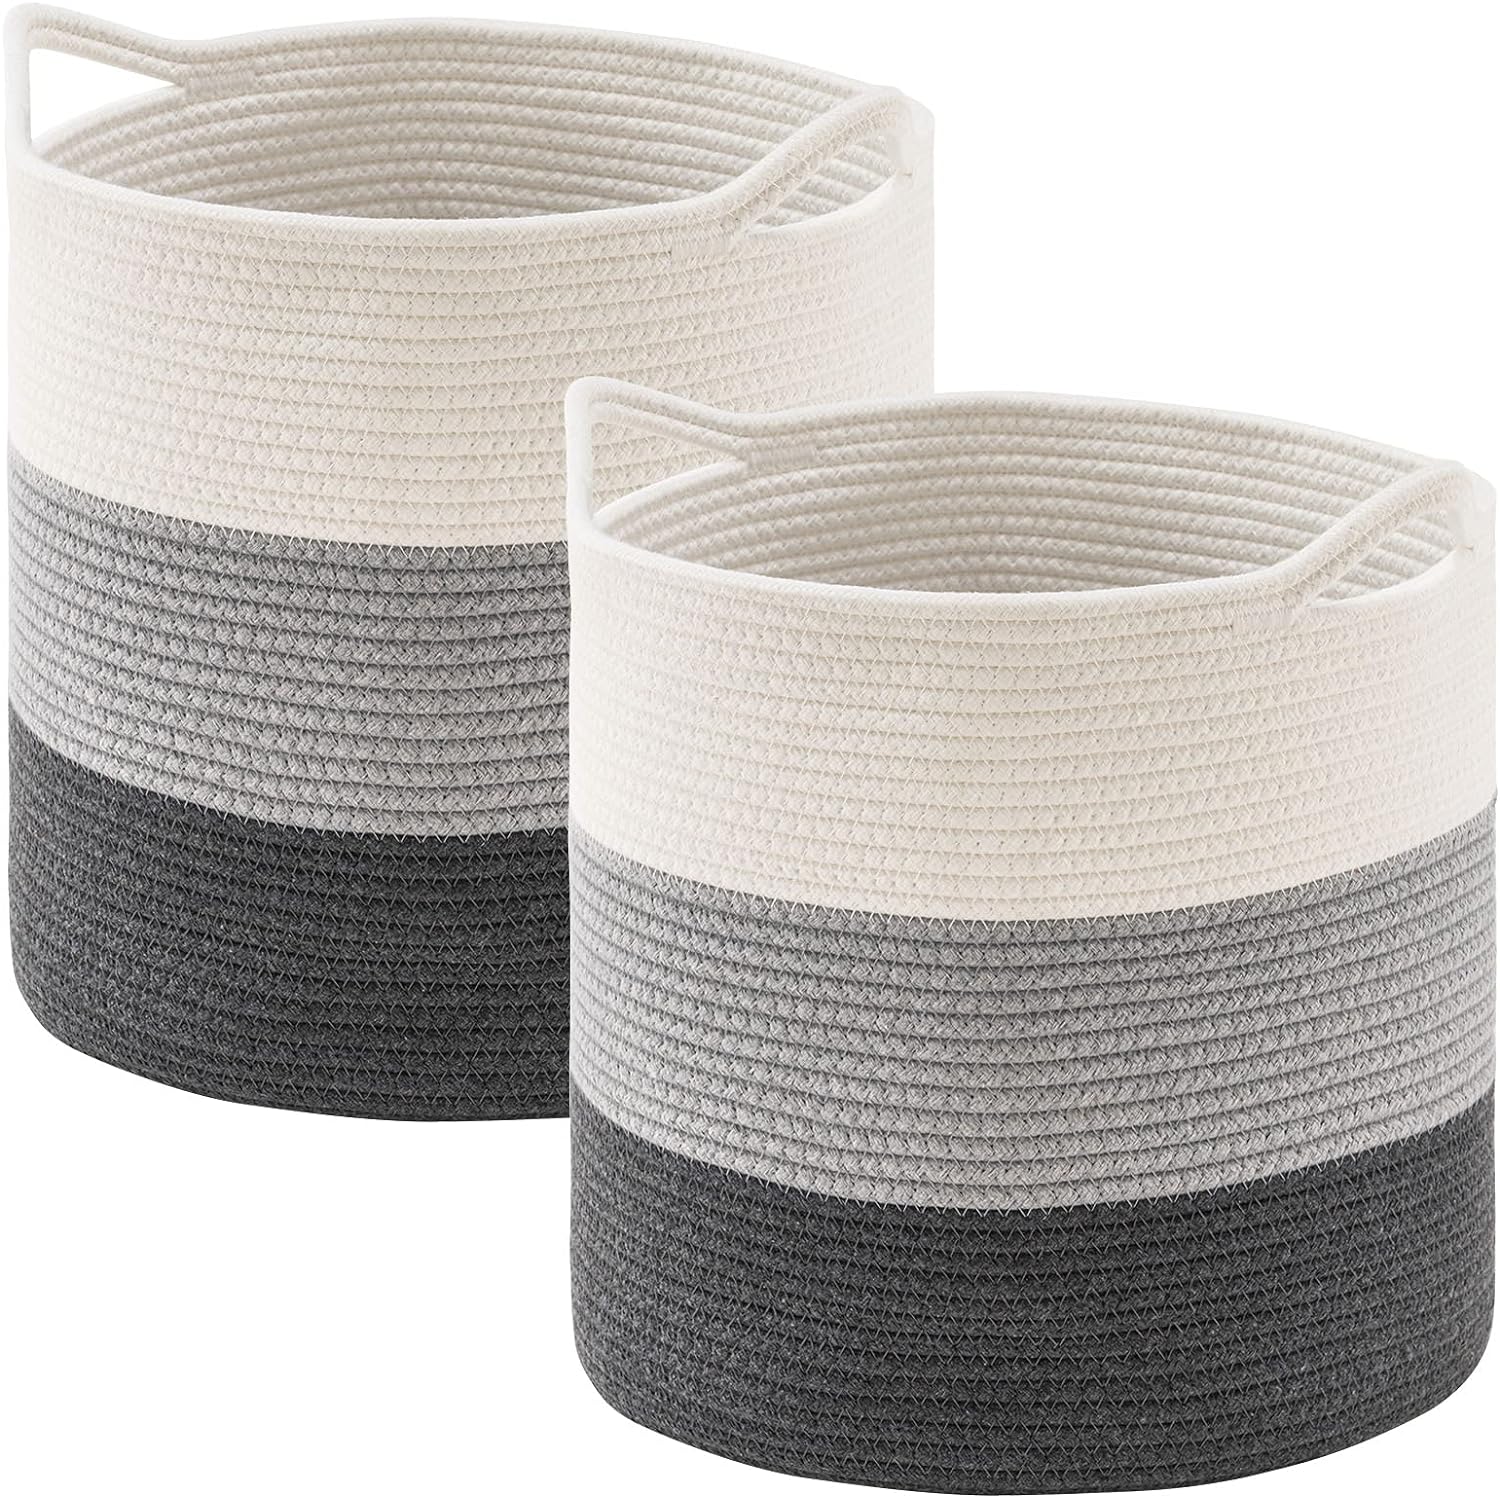 YOUDENOVA Cotton Rope Cube Storage Baskets, 13x13 Round Woven Baskets for Storage with Handles 2 Pack, Modern Decorative Storage Bins Dcor Baskets for 13 inch Cube Storage Shelves, Mix Grey